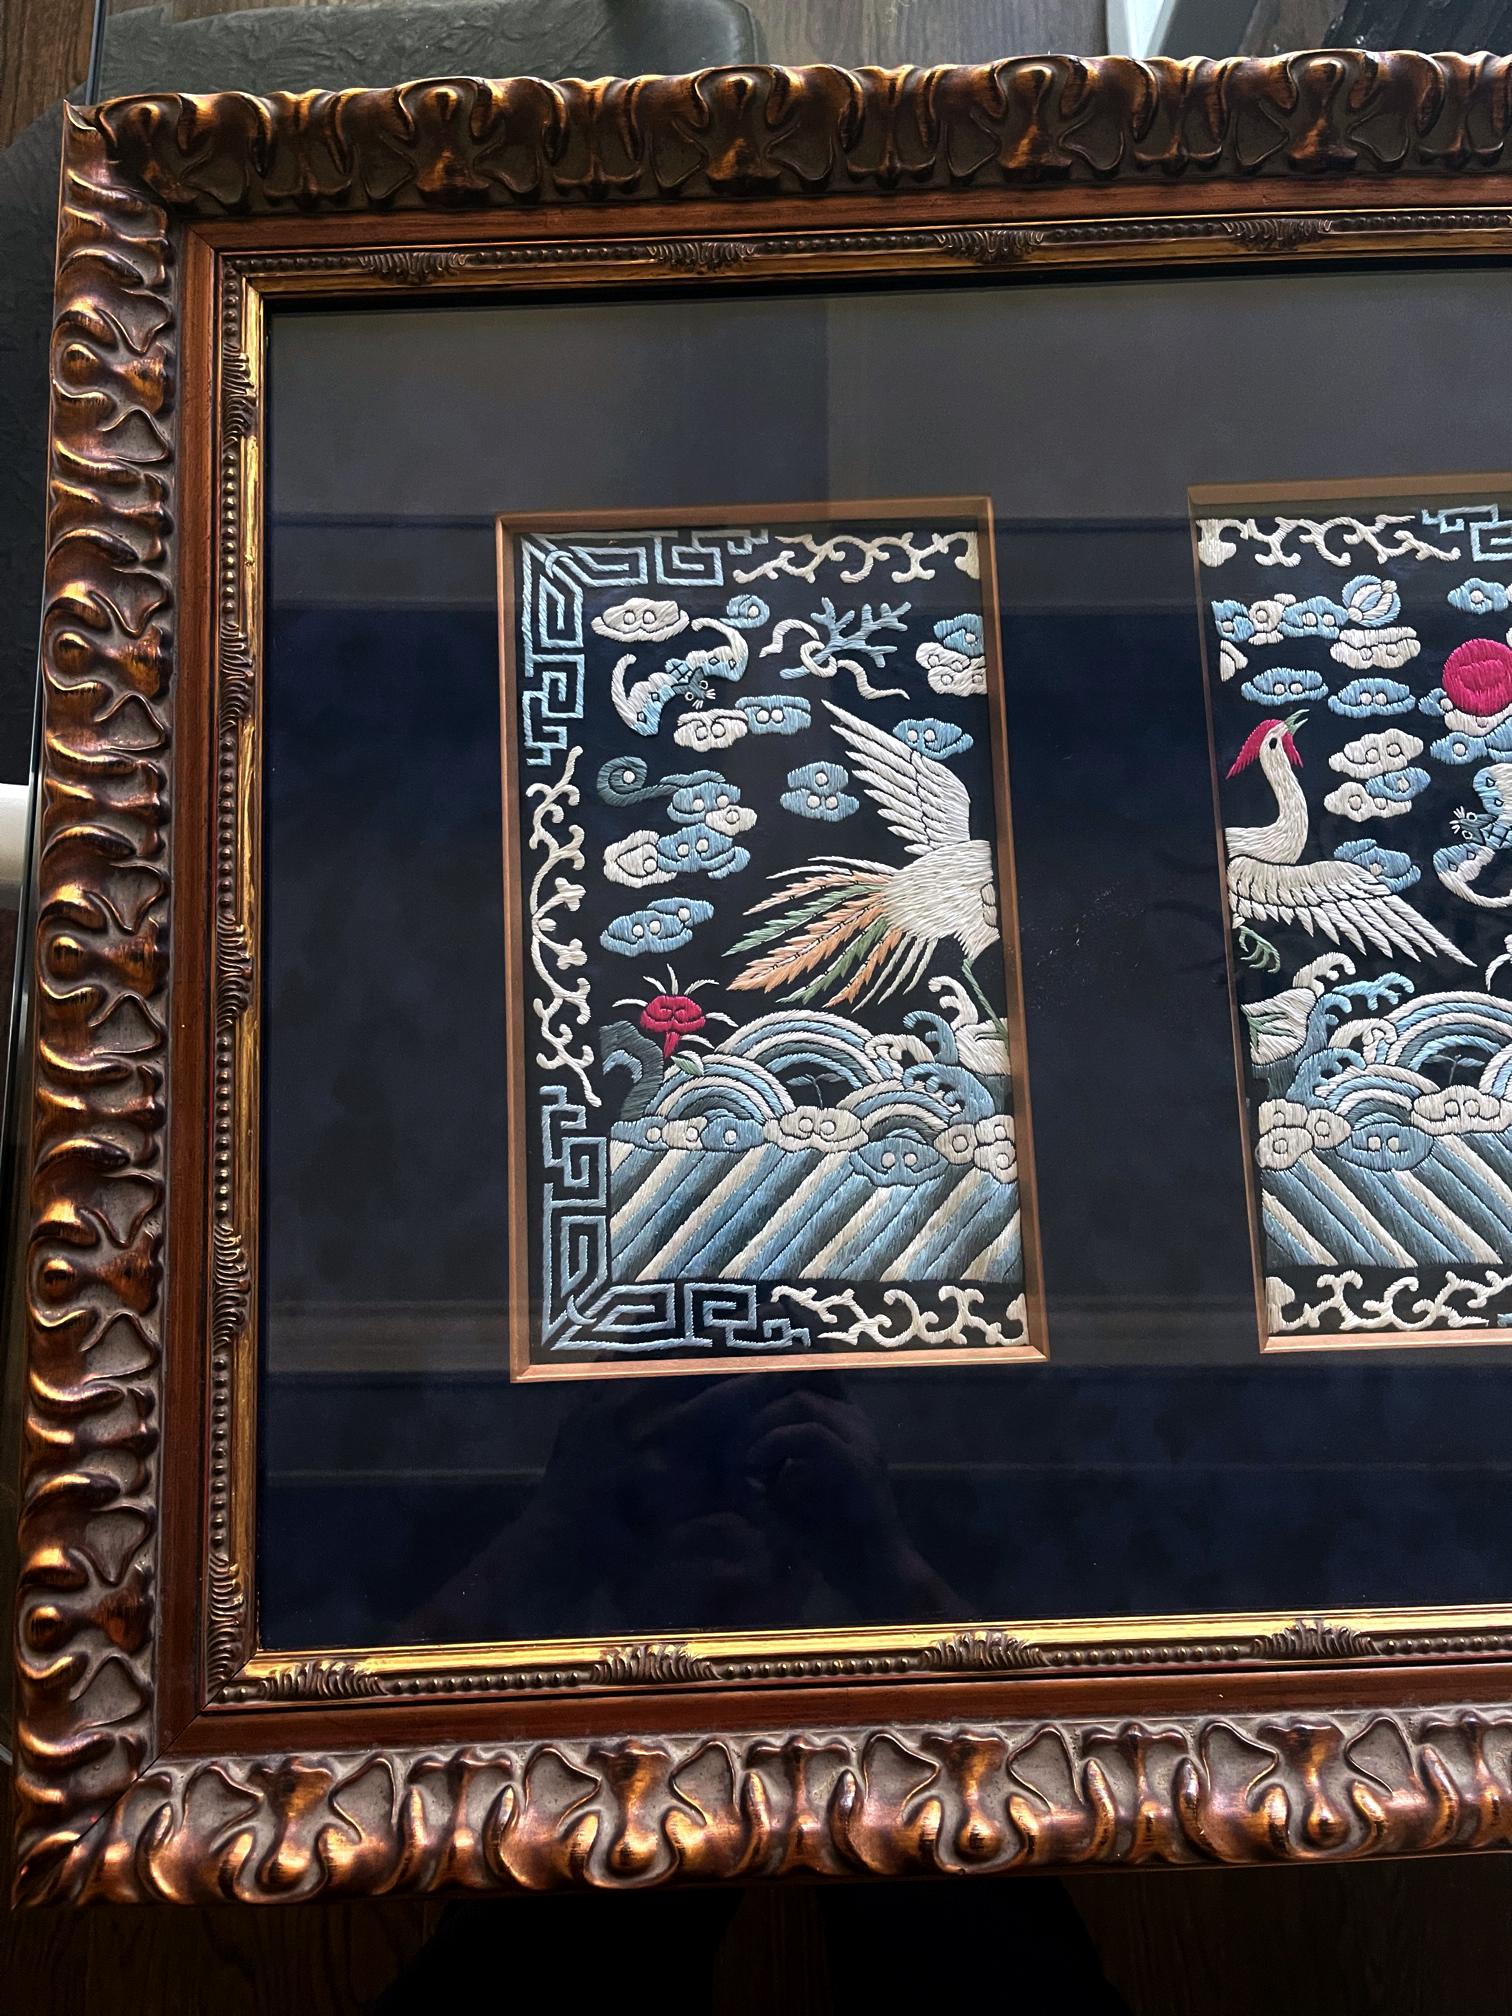 A finely embroidered silk civil rank badge panel matted and framed in an elaborate giltwood frame circa mid-late 19th century. The square rank badge is known in Chinese as Buzi and because it is split, it was originally placed on the front of the